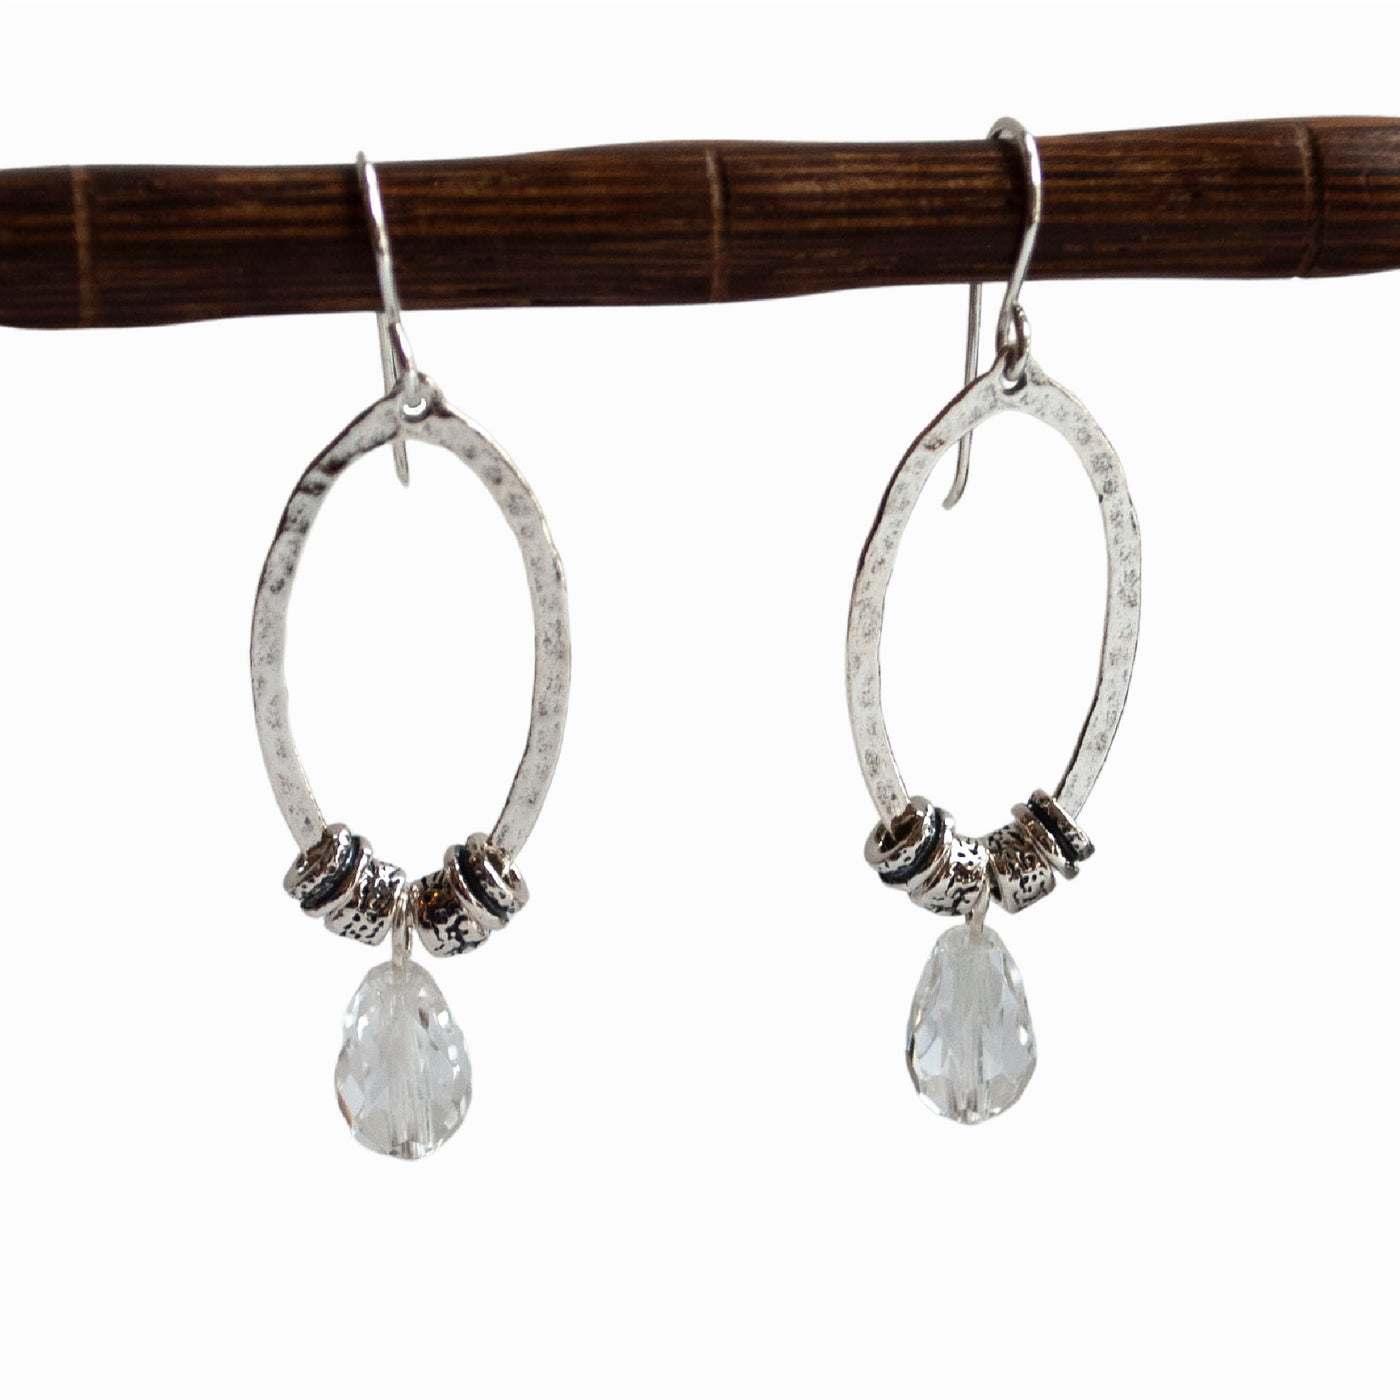 Sterling silver earrings with crystal drops